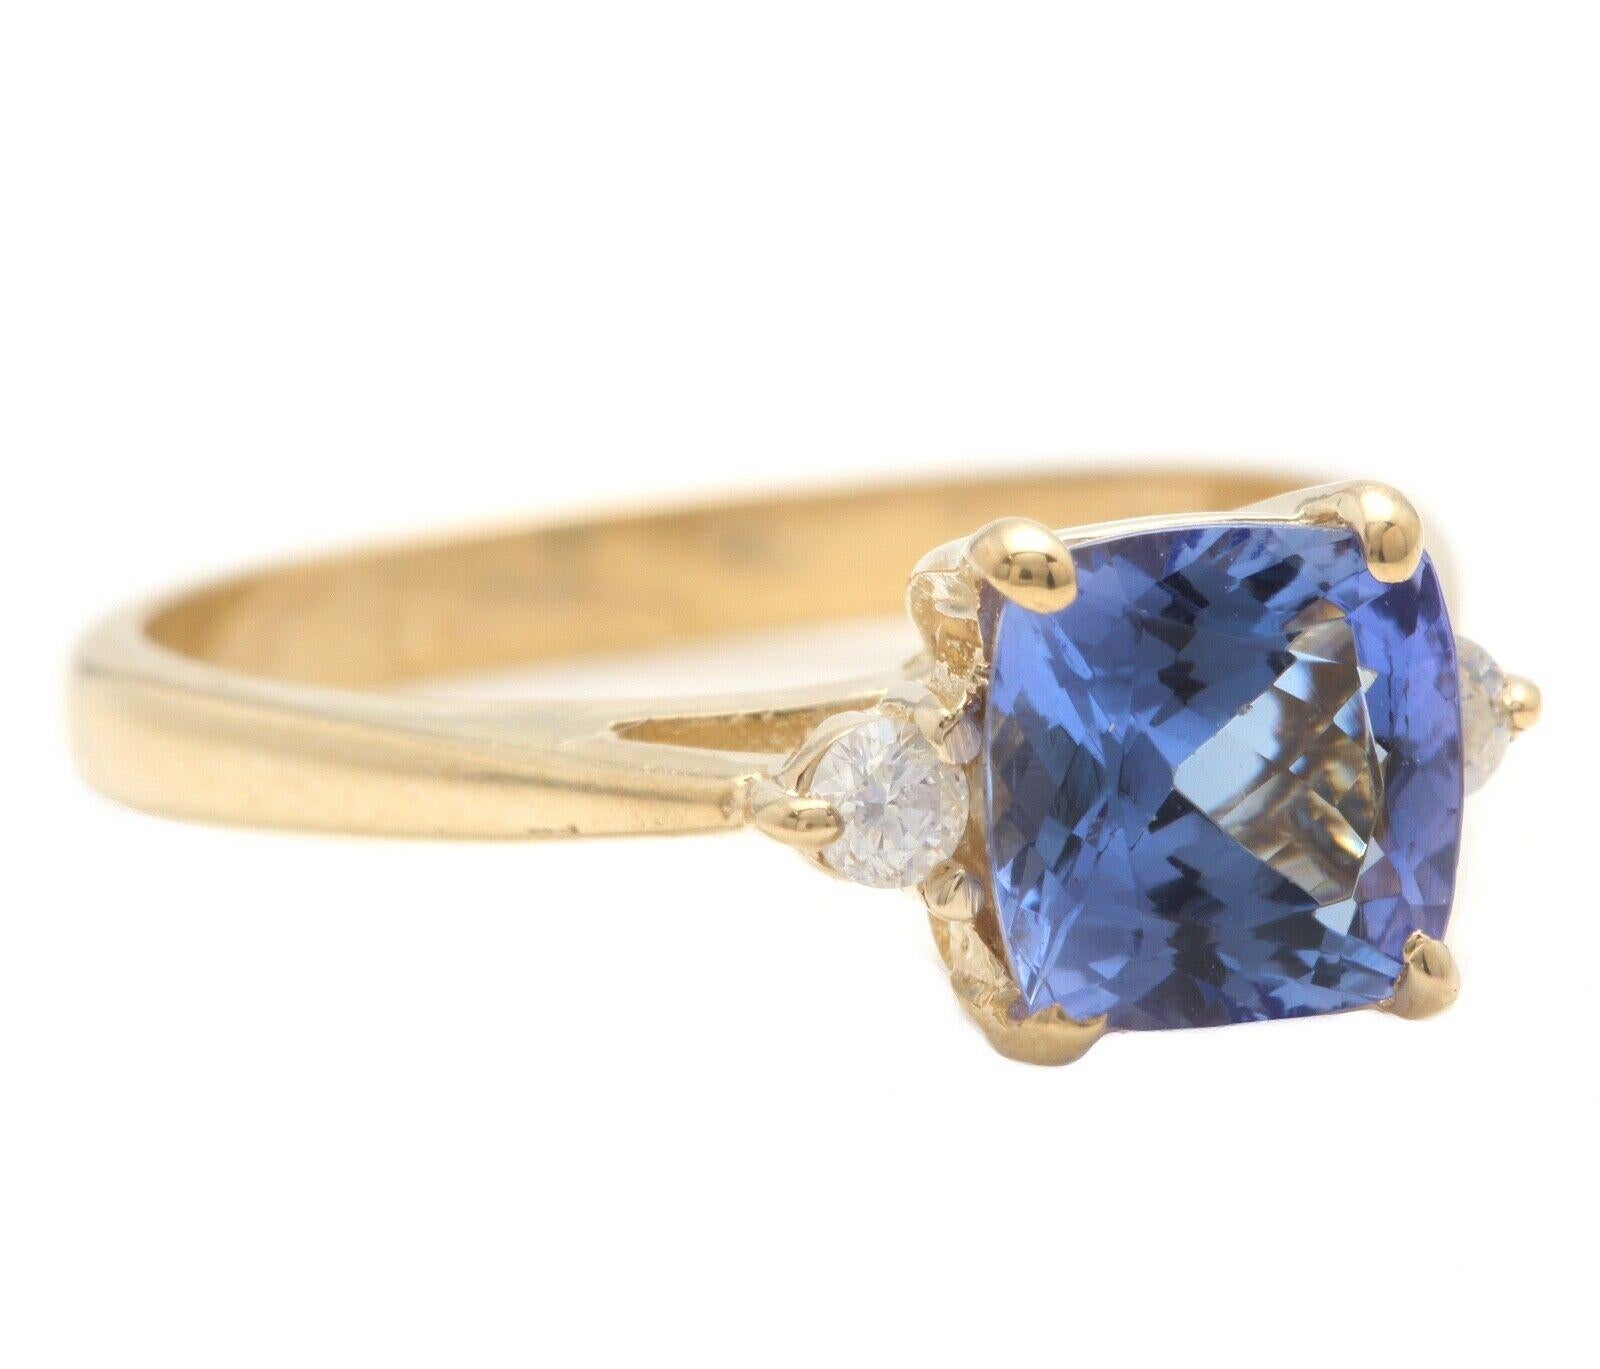 1.30 Carats Natural Very Nice Looking Tanzanite and Diamond 14K Solid Yellow Gold Ring

Suggested Replacement Value:  $3,500.00

Total Natural Cushion Tanzanite Weight is: Approx. 1.24 Carats 

Tanzanite Measures: Approx. 6.40 x 6.40mm

Natural